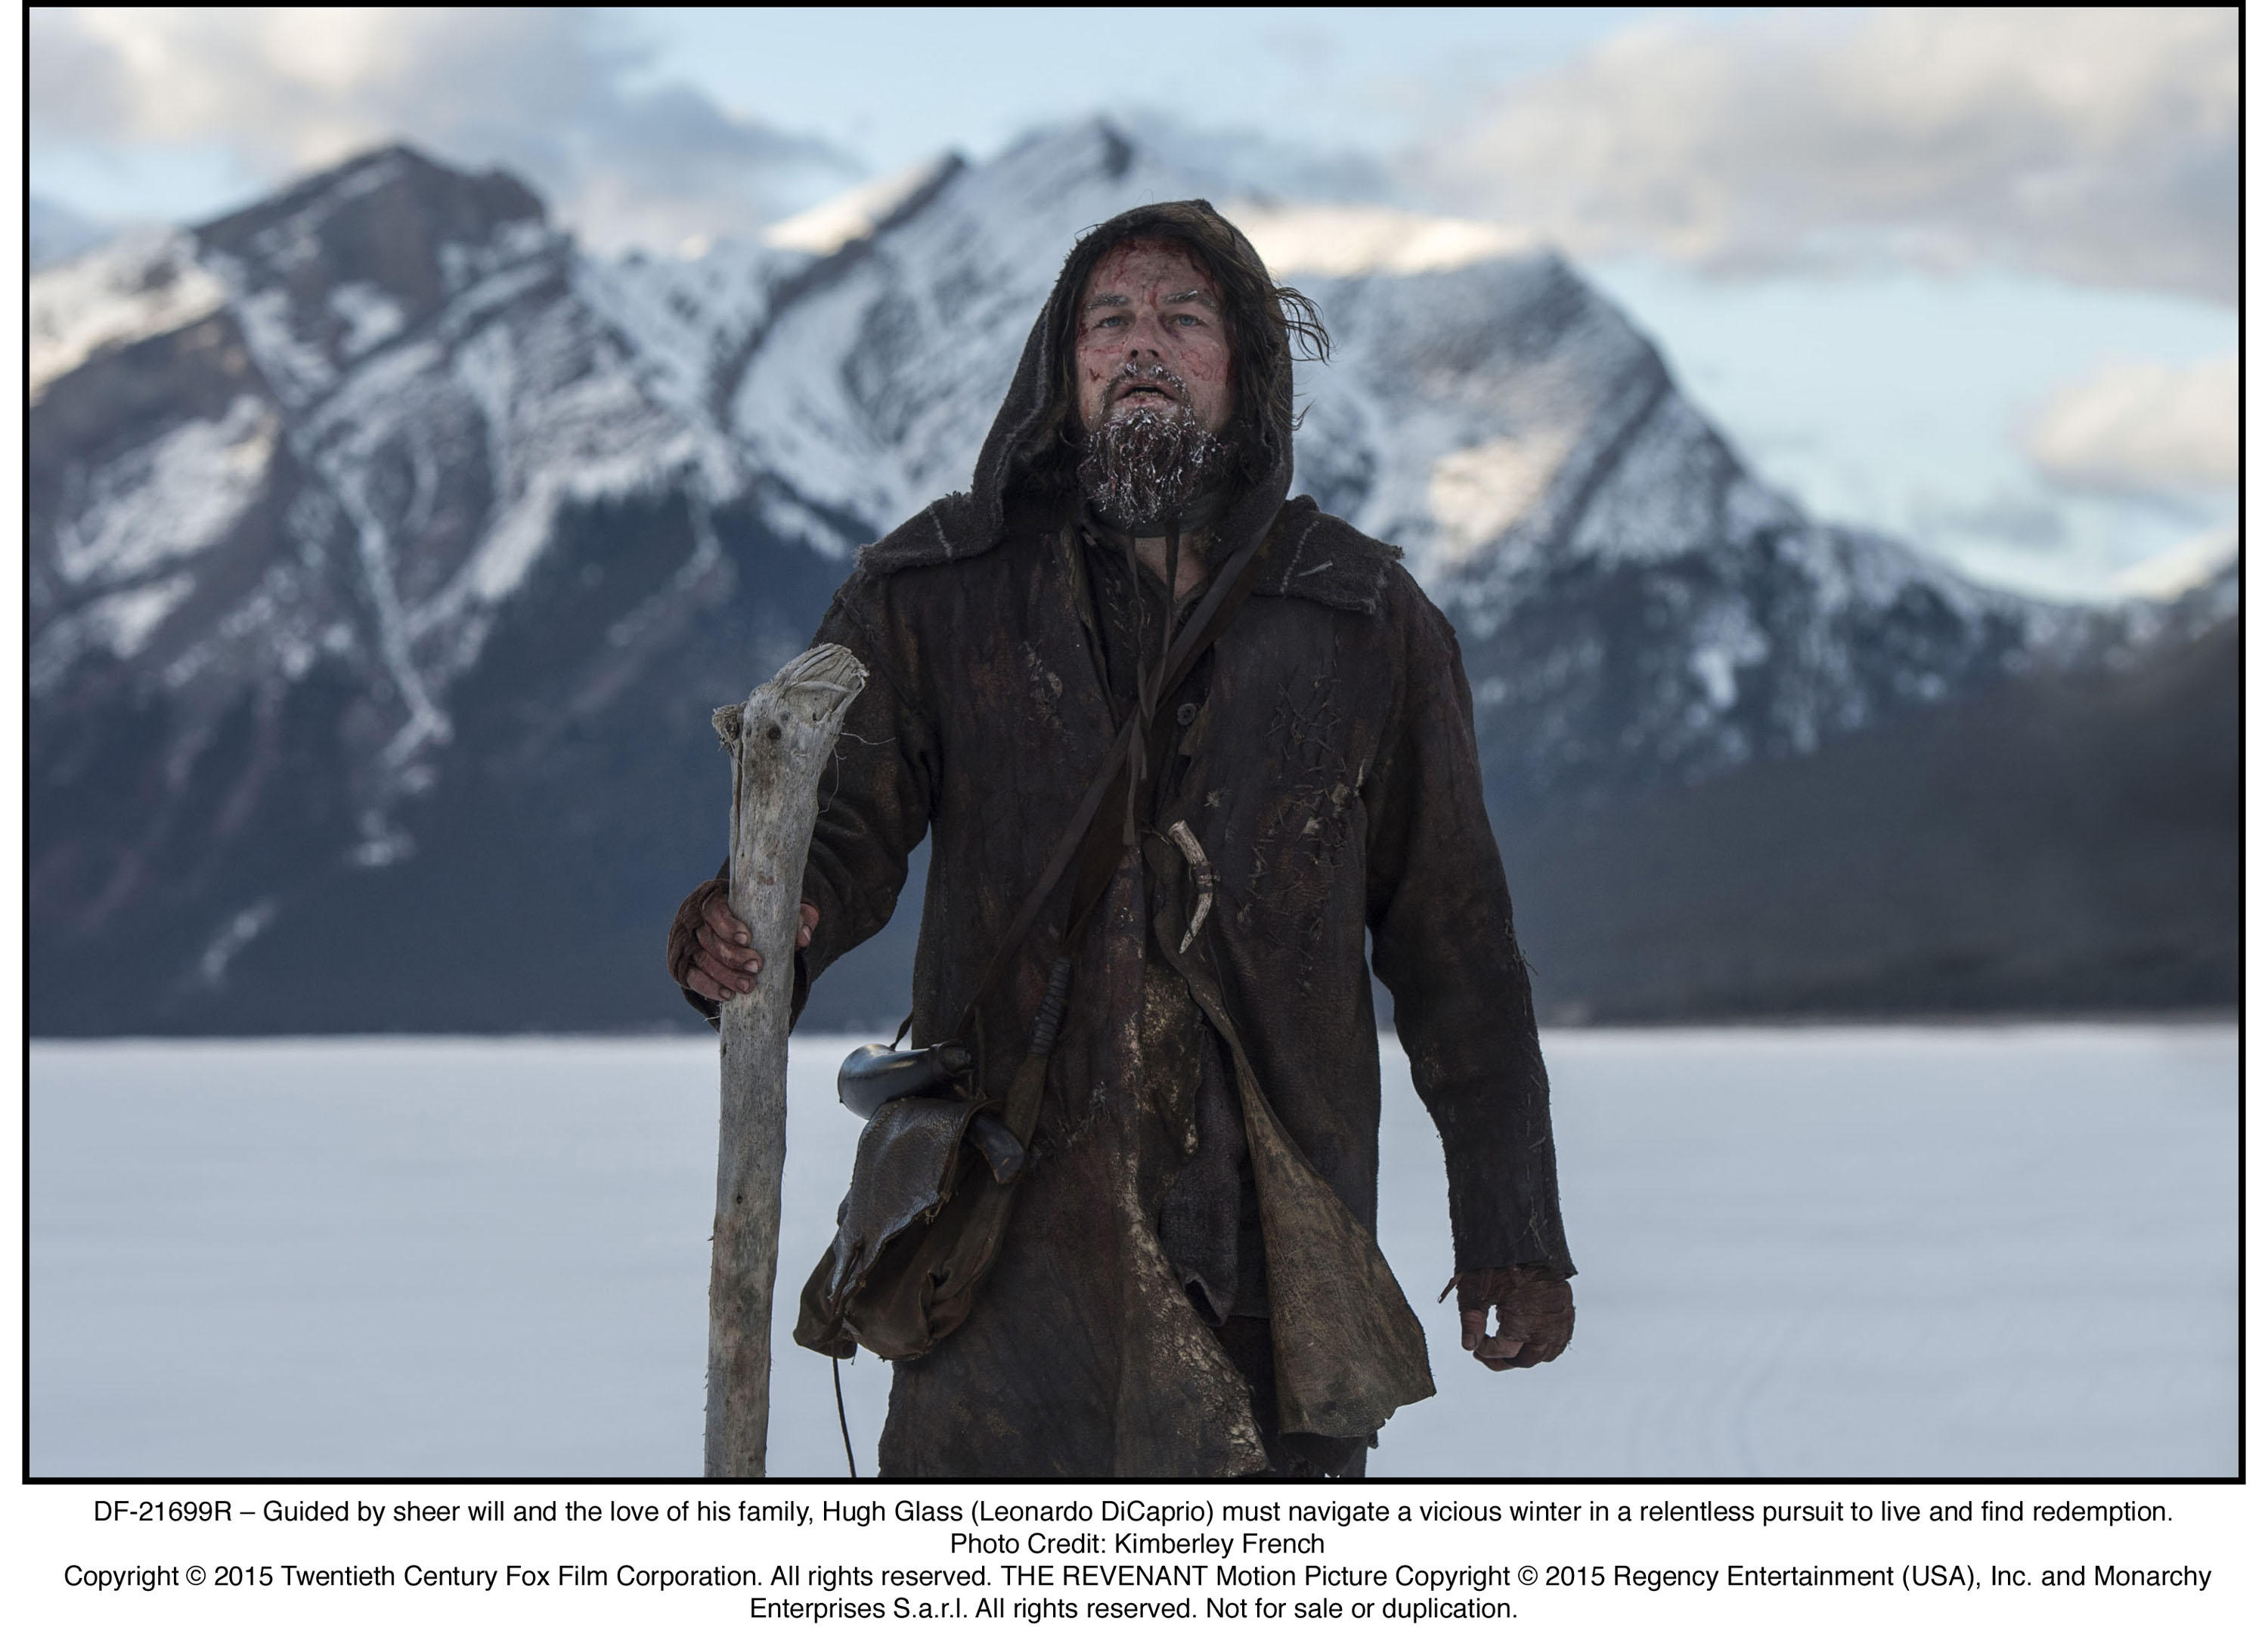 Guided by sheer will and the love of his family, Hugh Glass (Leonardo DiCaprio) must navigate a vicious winter in a relentless pursuit to live and find redemption.